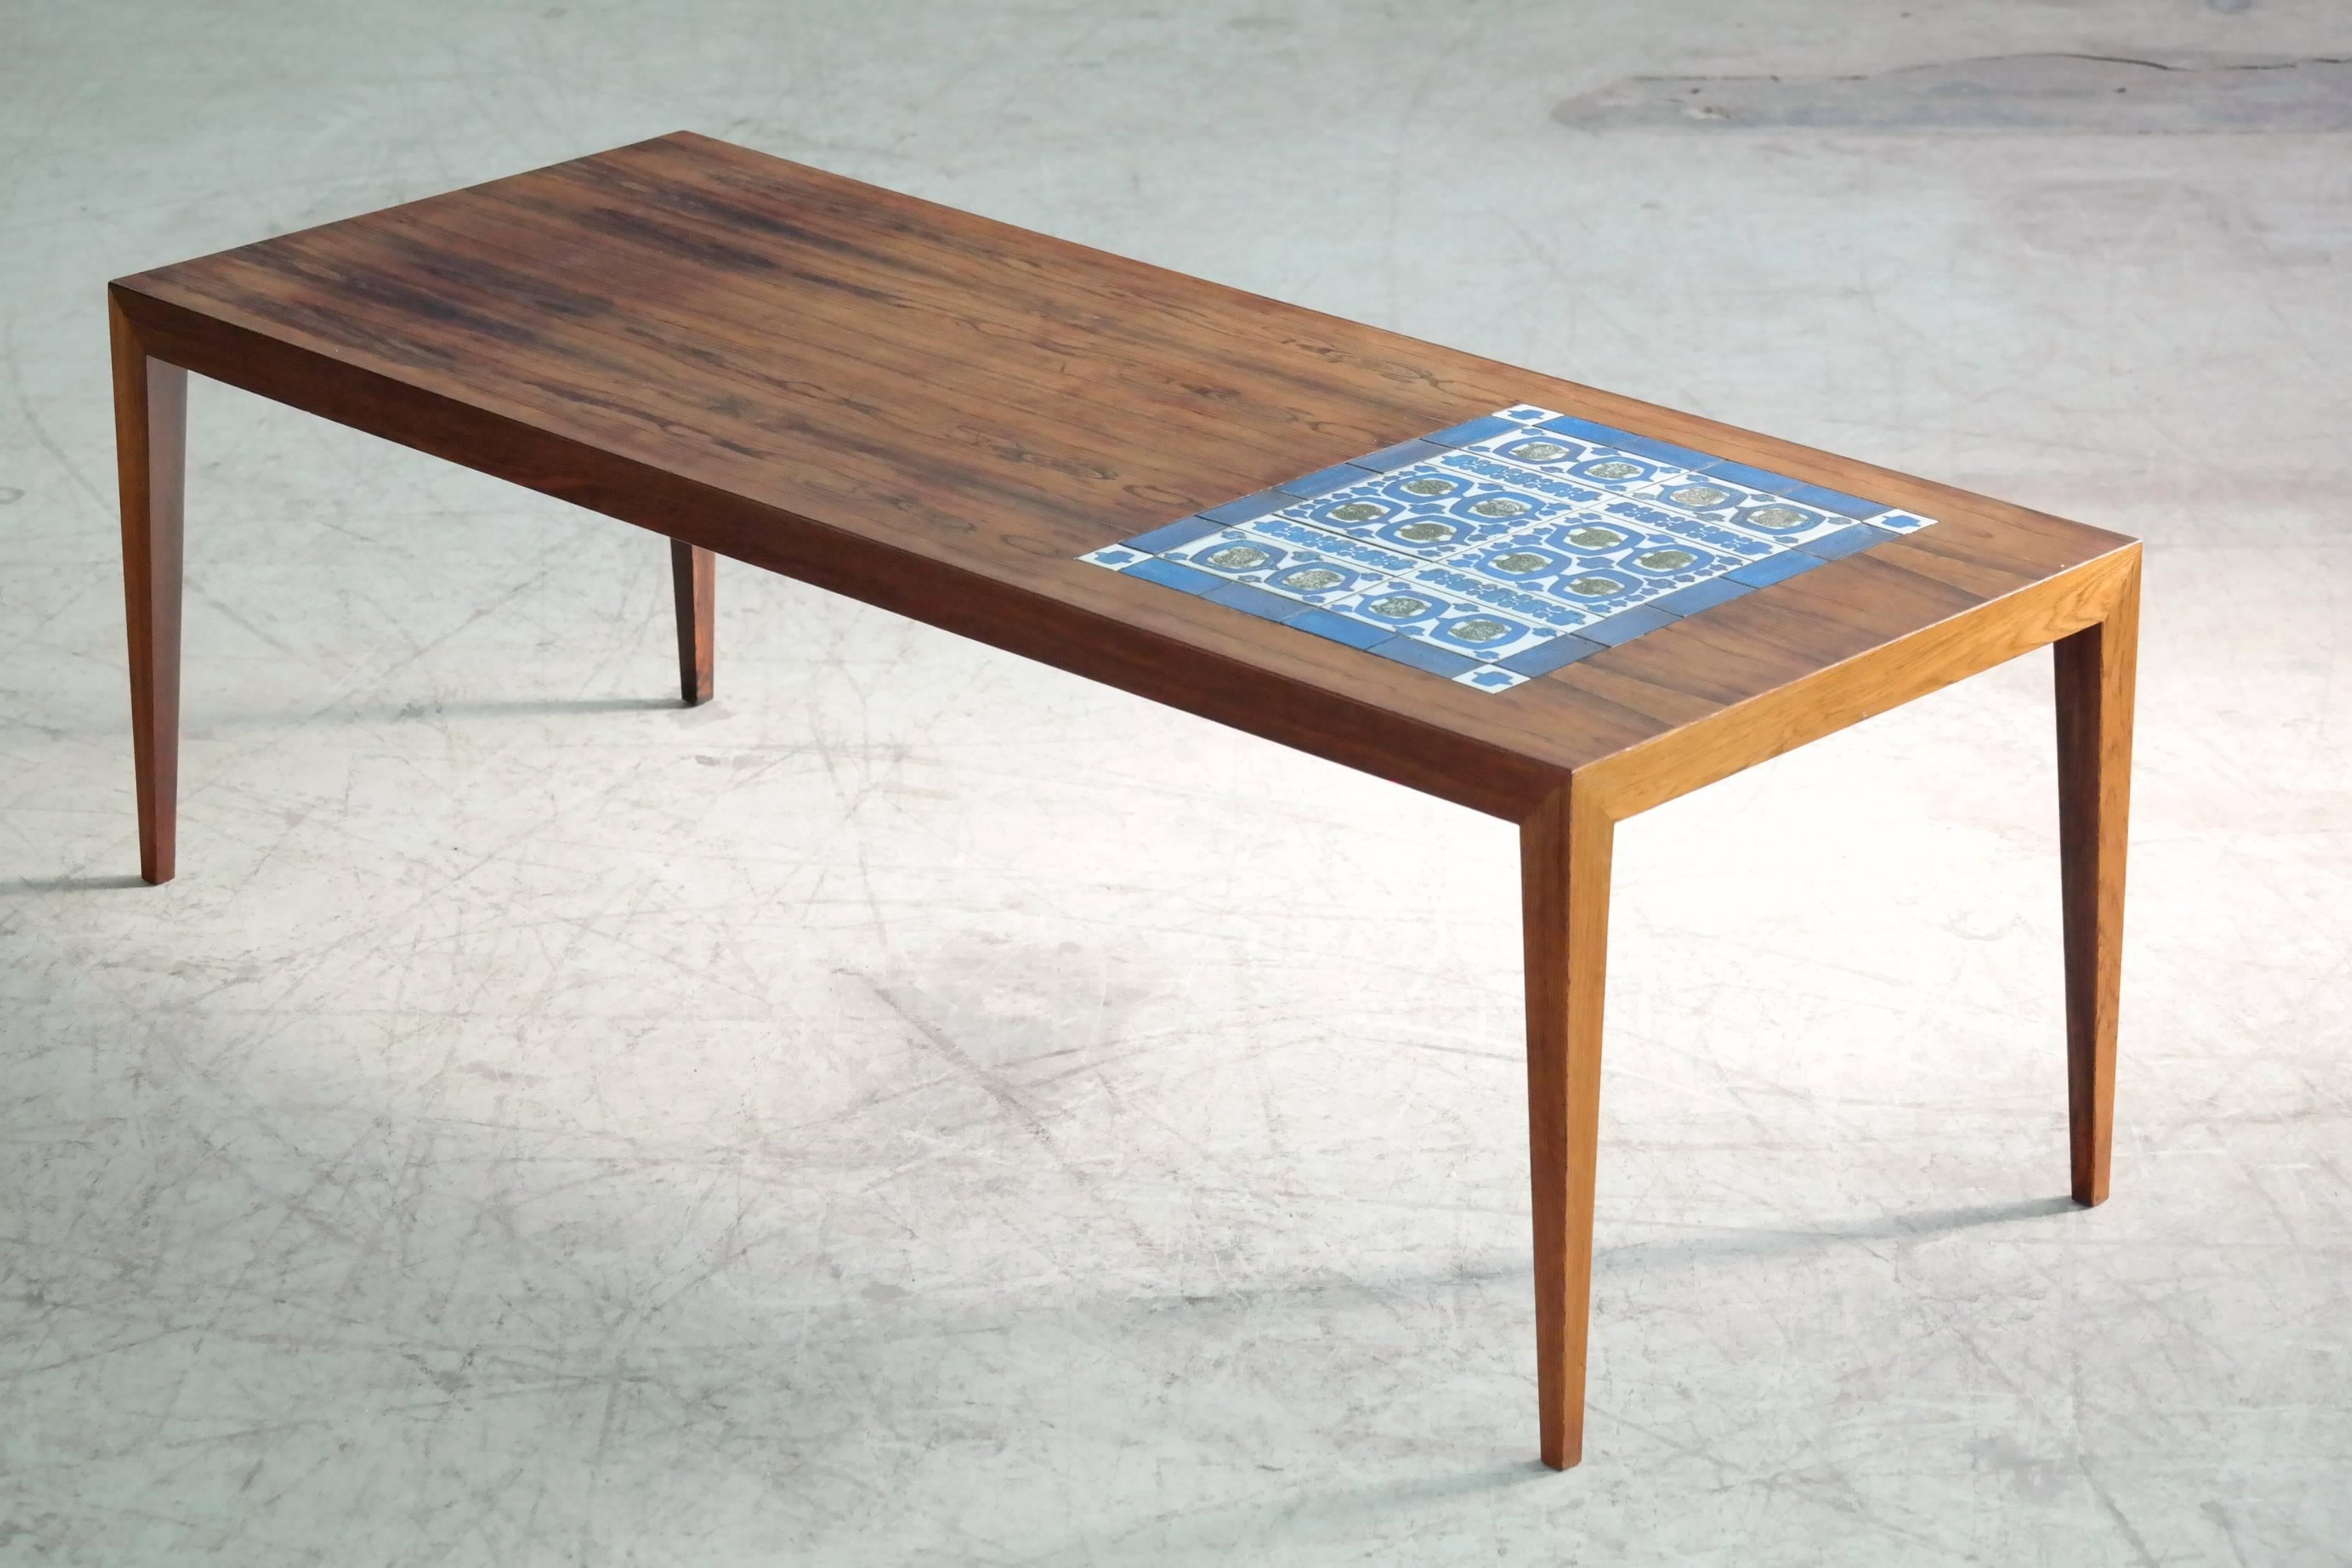 Beautiful rosewood coffee table by Severin Hansen Jr. for Haslev with inlaid tiles designed by Grethe Hellan Hansen and manufactured by Royal Copenhagen. Haslev's coffee tables epitomizes minimalist elegance with its sharp lines and iconic diamond